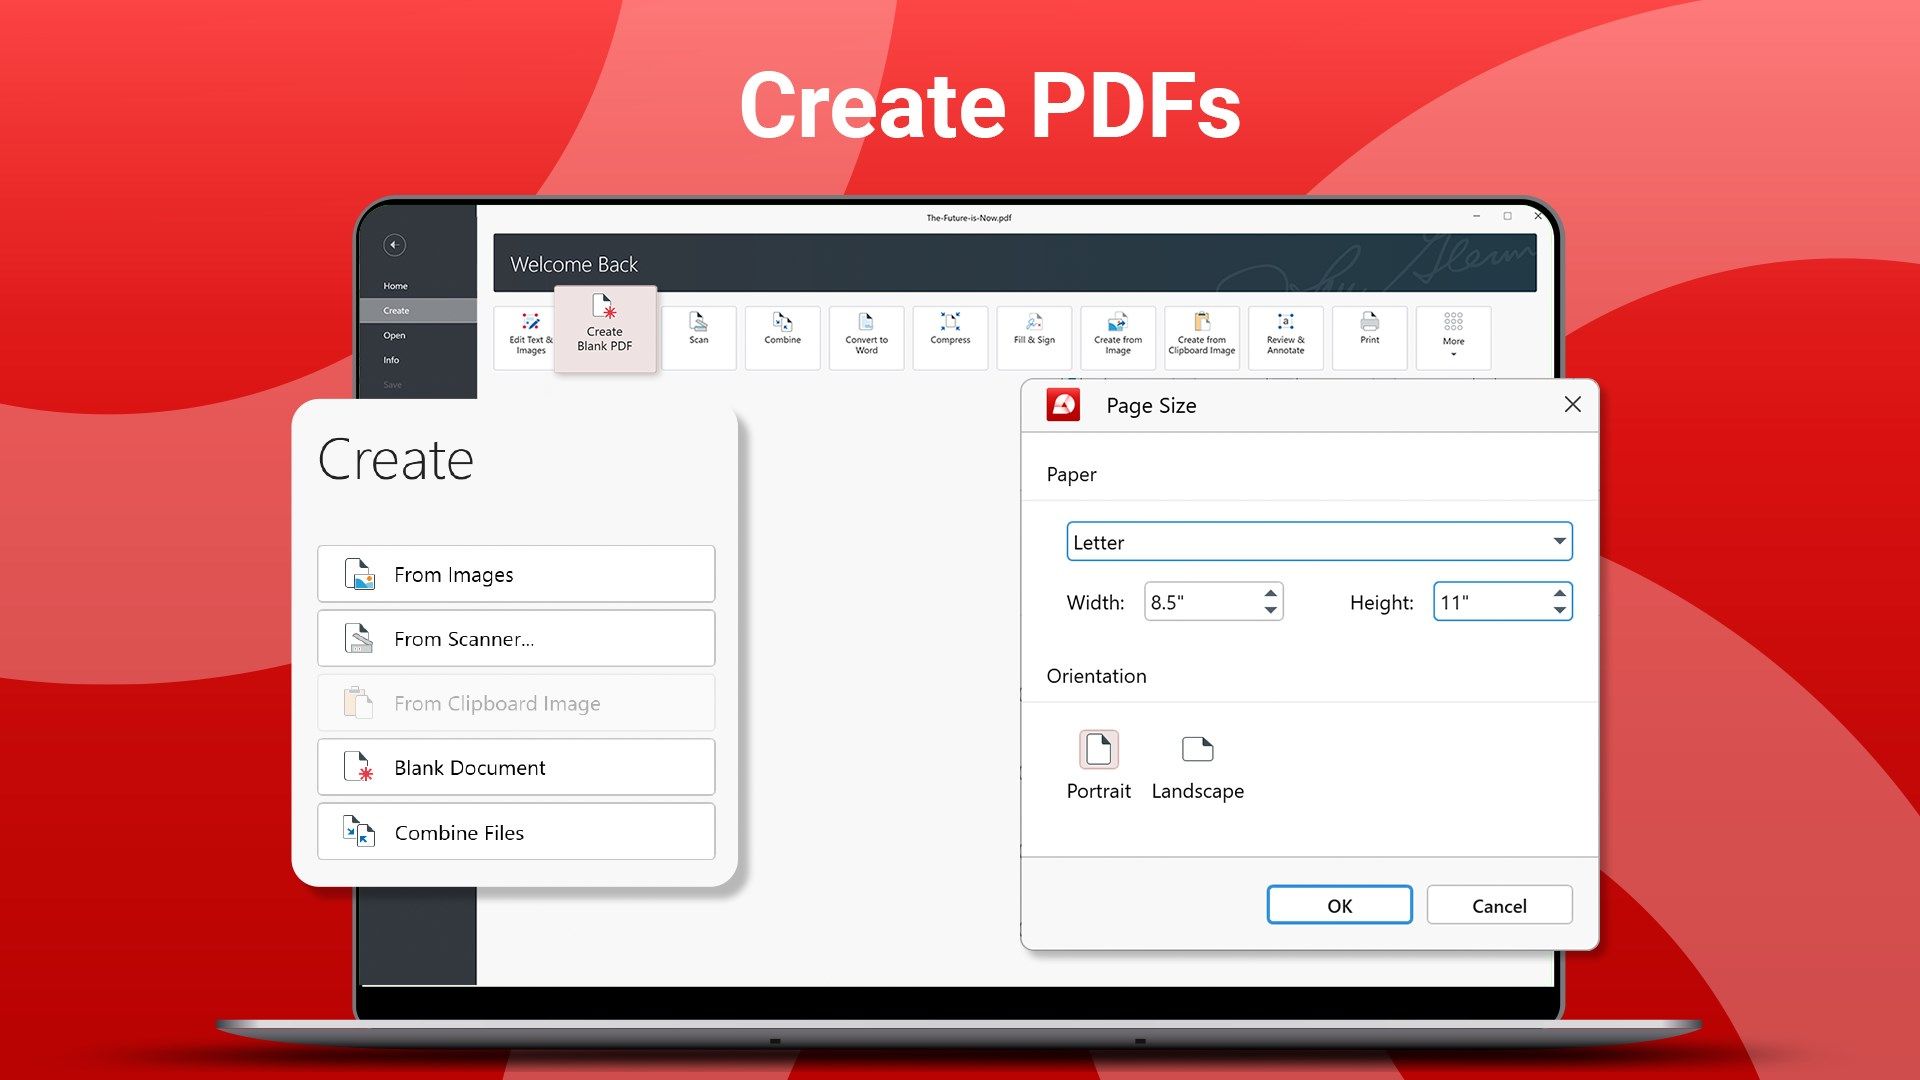 Create PDFs. Control your PDF's structure, design or content. Edit
text & images, rearrange pages or insert bookmarks.
The choice is yours.